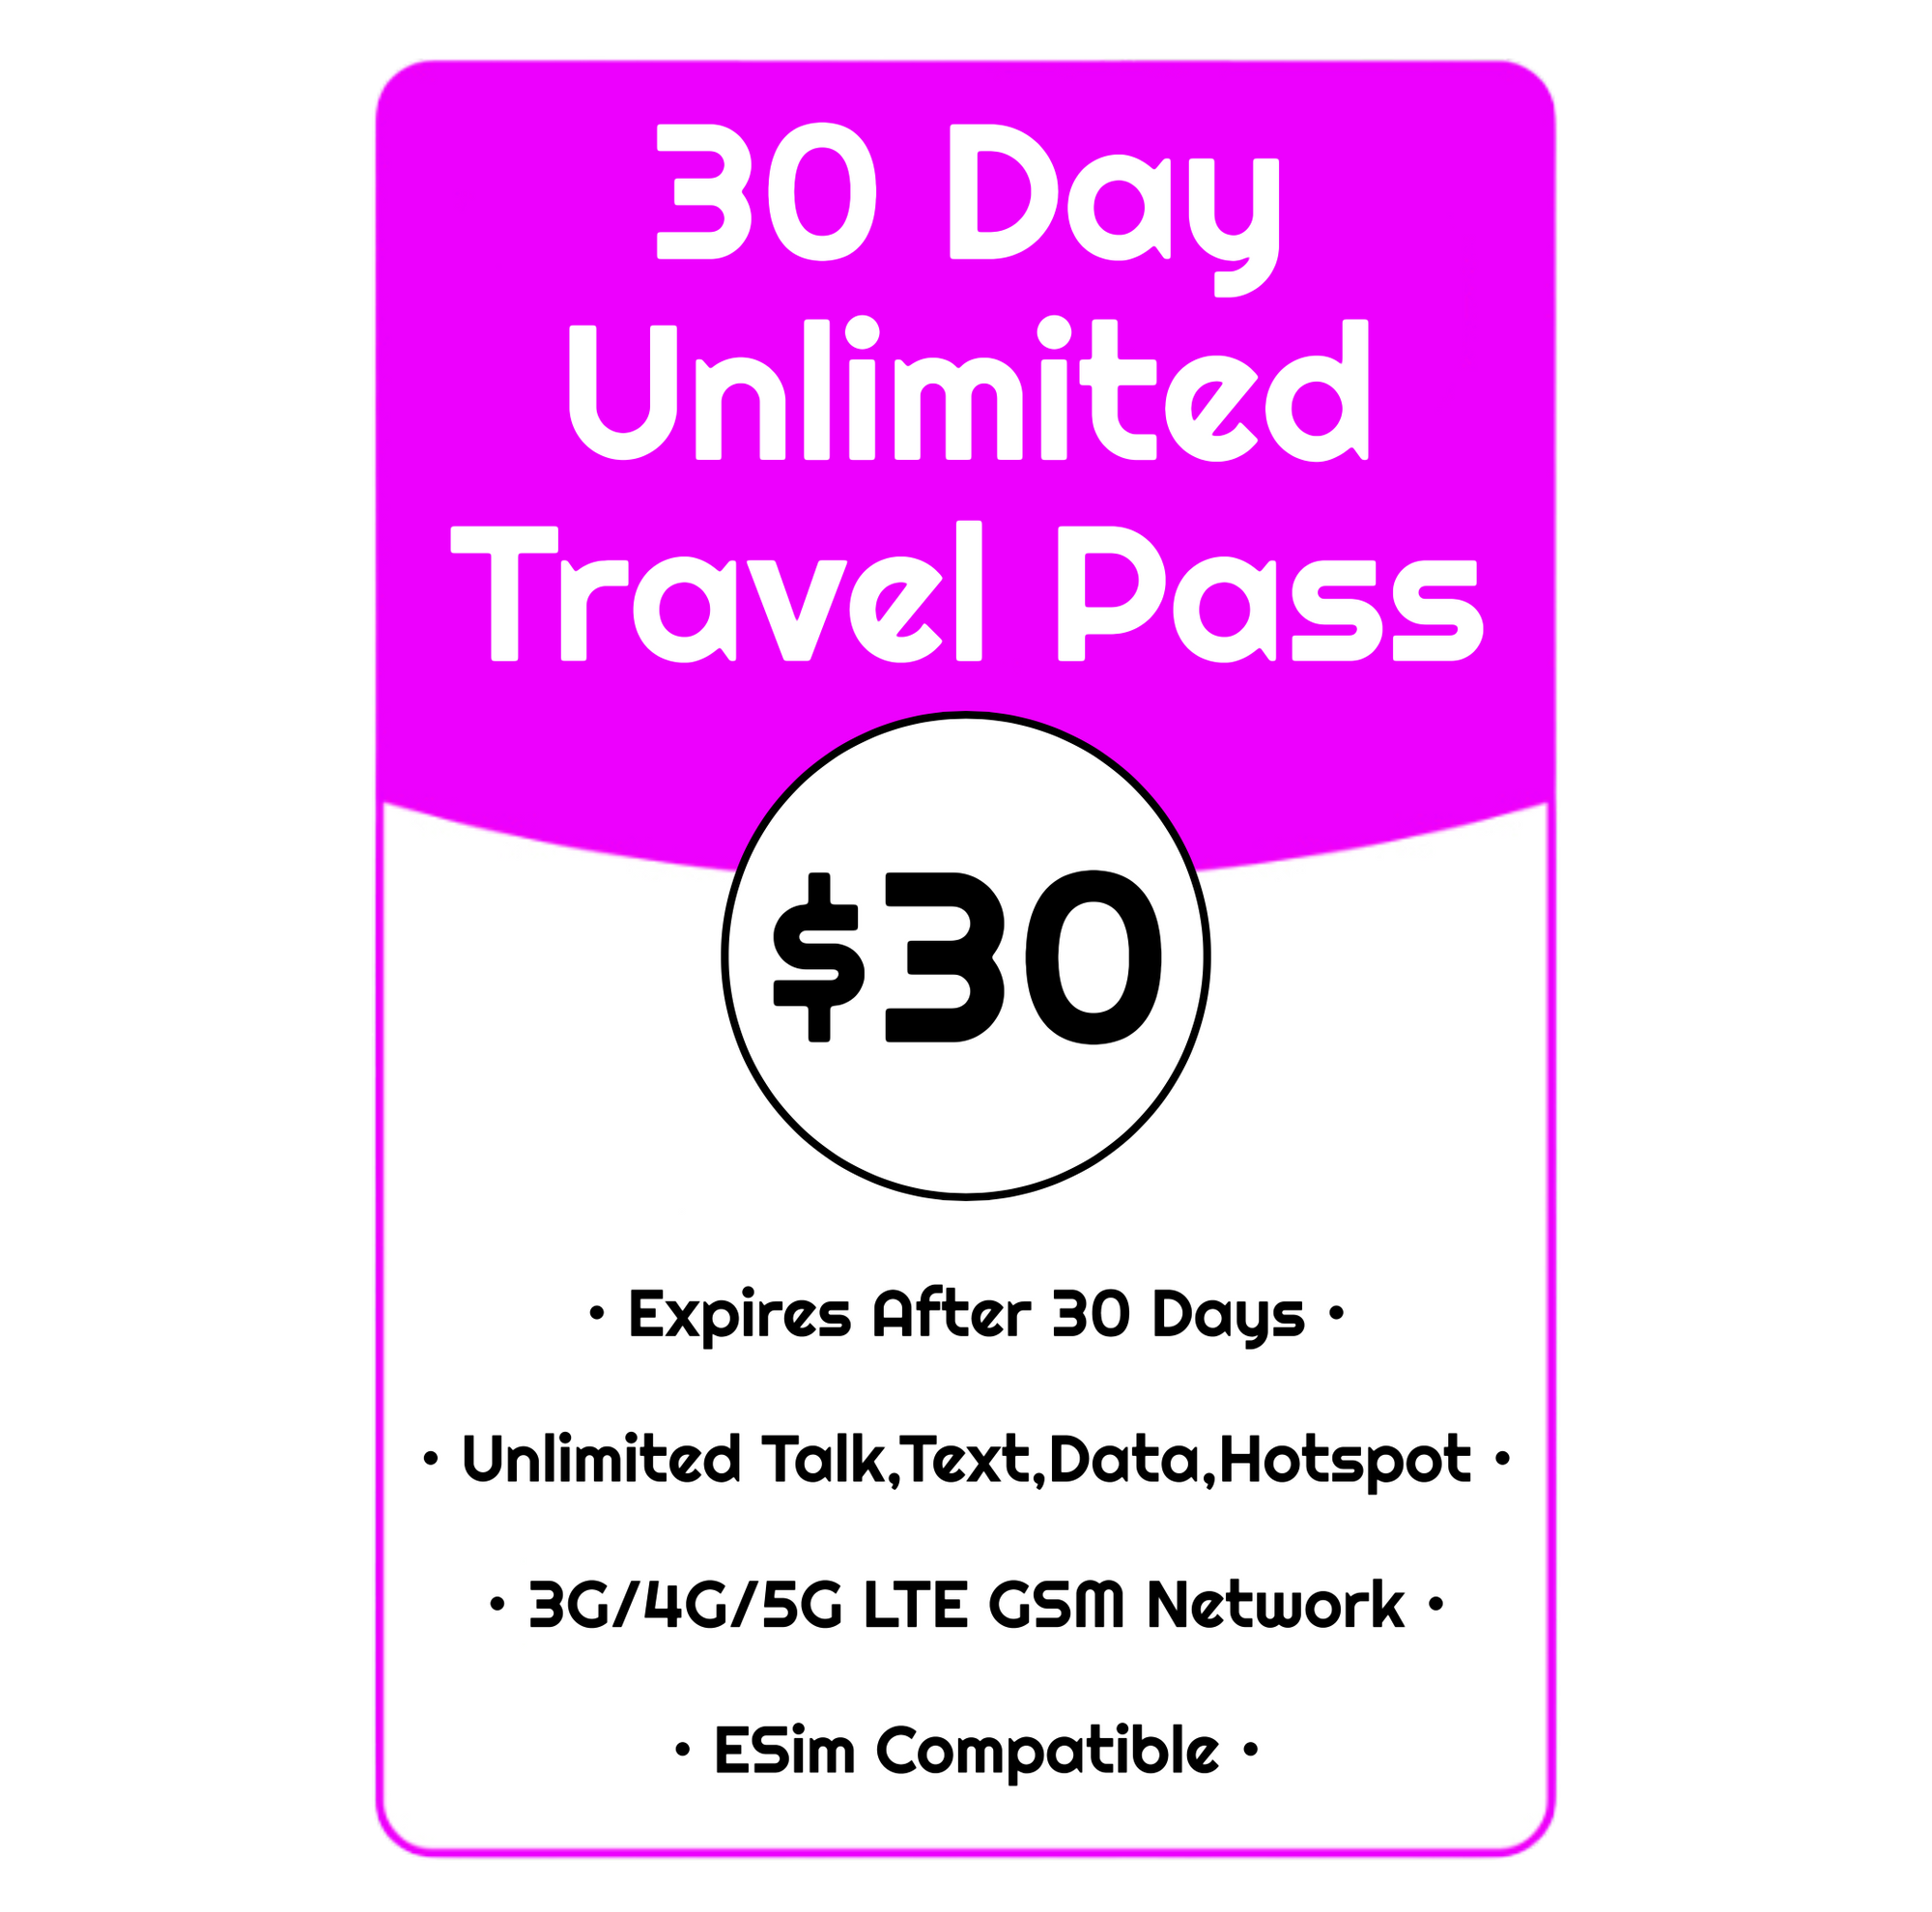 30 Day Unlimited Travel Pass - Amethyst Network